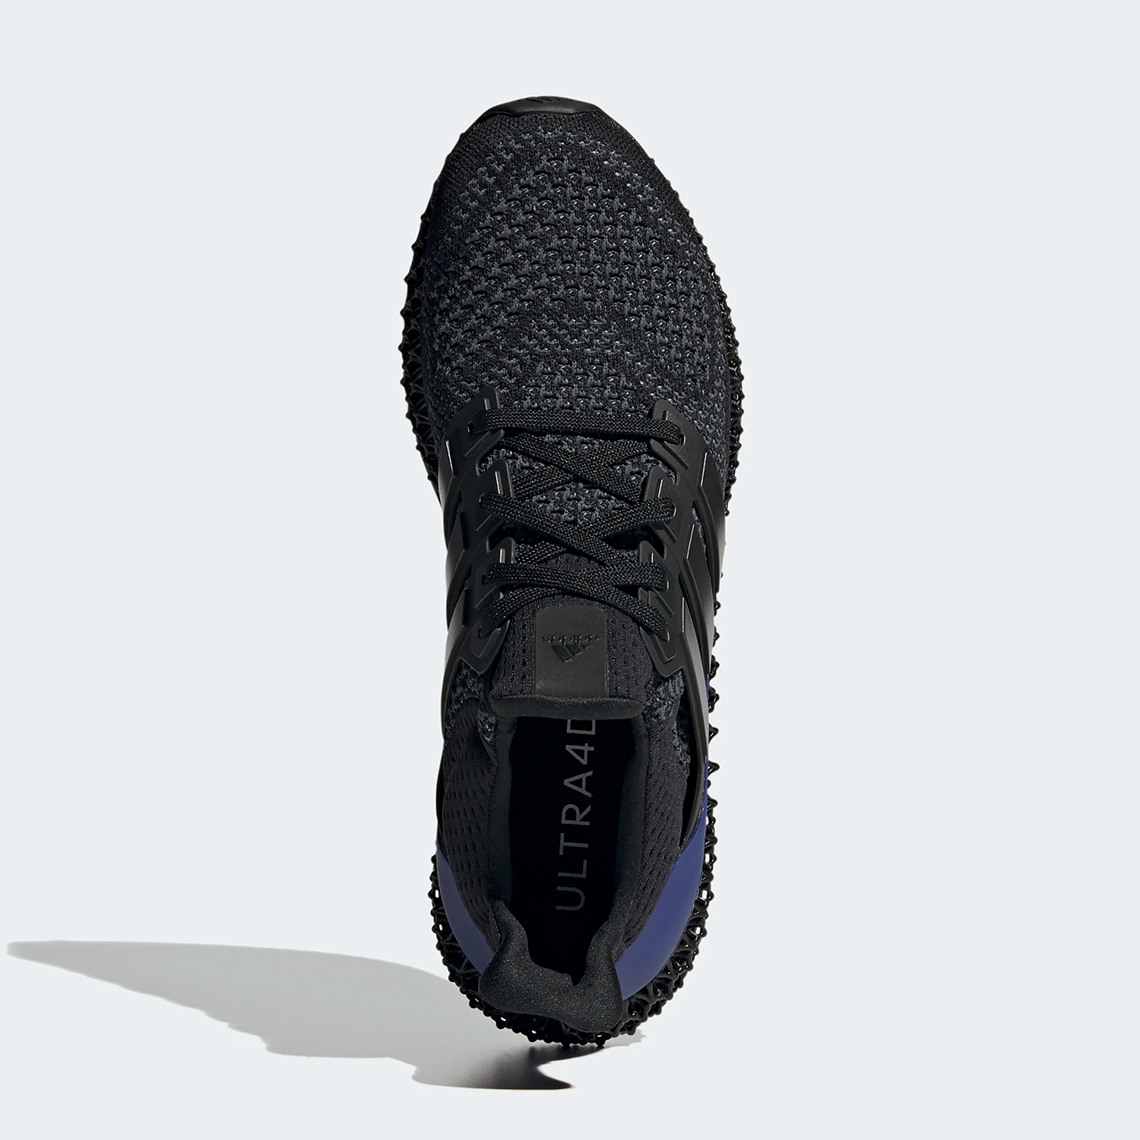 Cheap Adidas Yeezy Boost 350 V2 Quotcarbonquot Size Fz5000